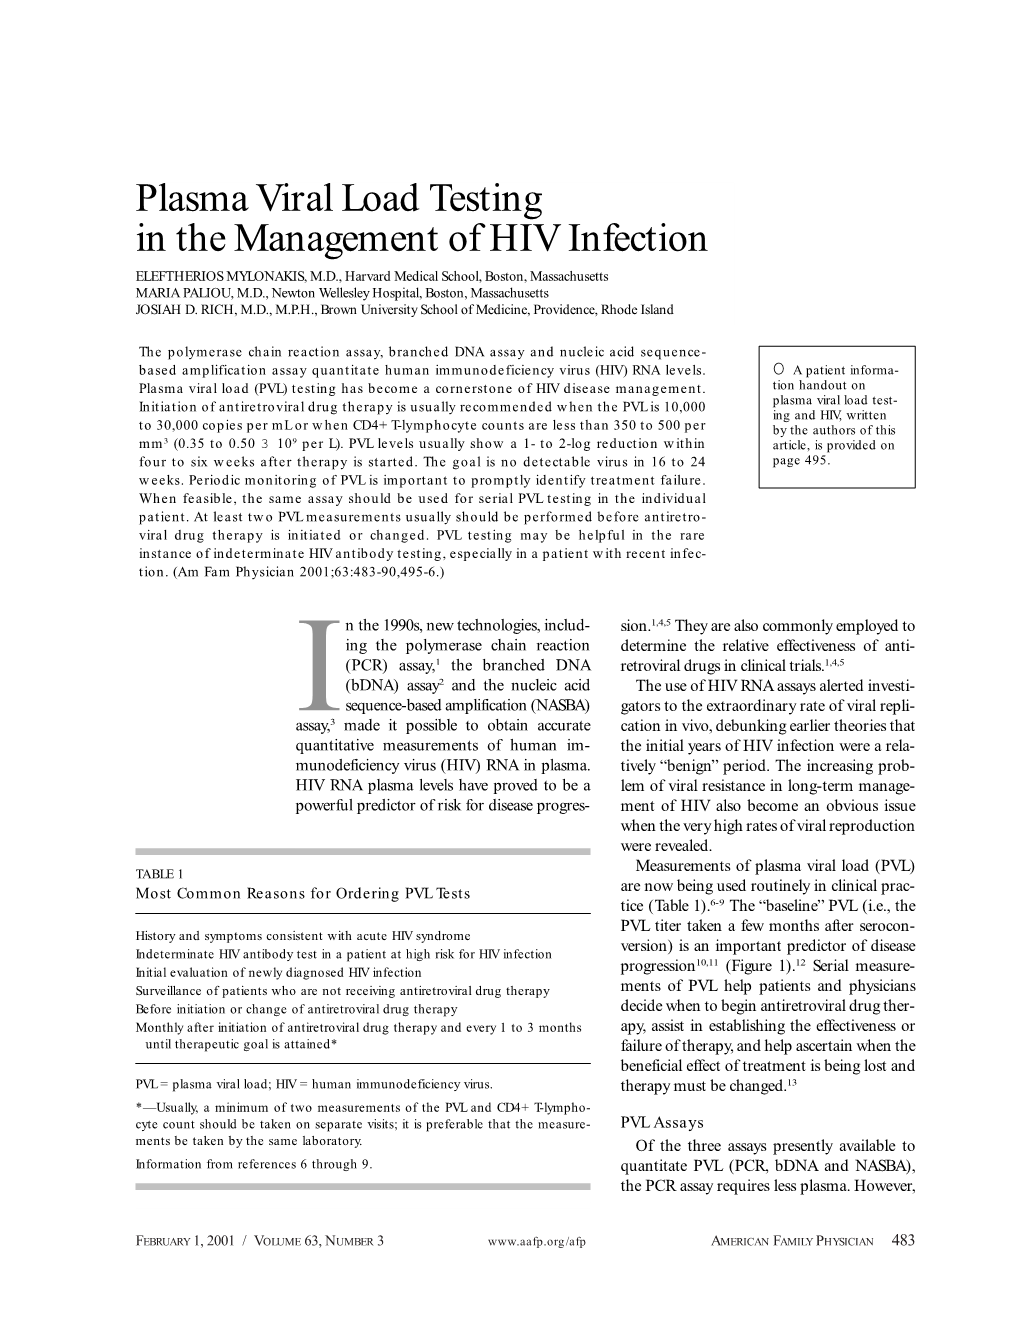 Plasma Viral Load Testing in the Management of HIV Infection